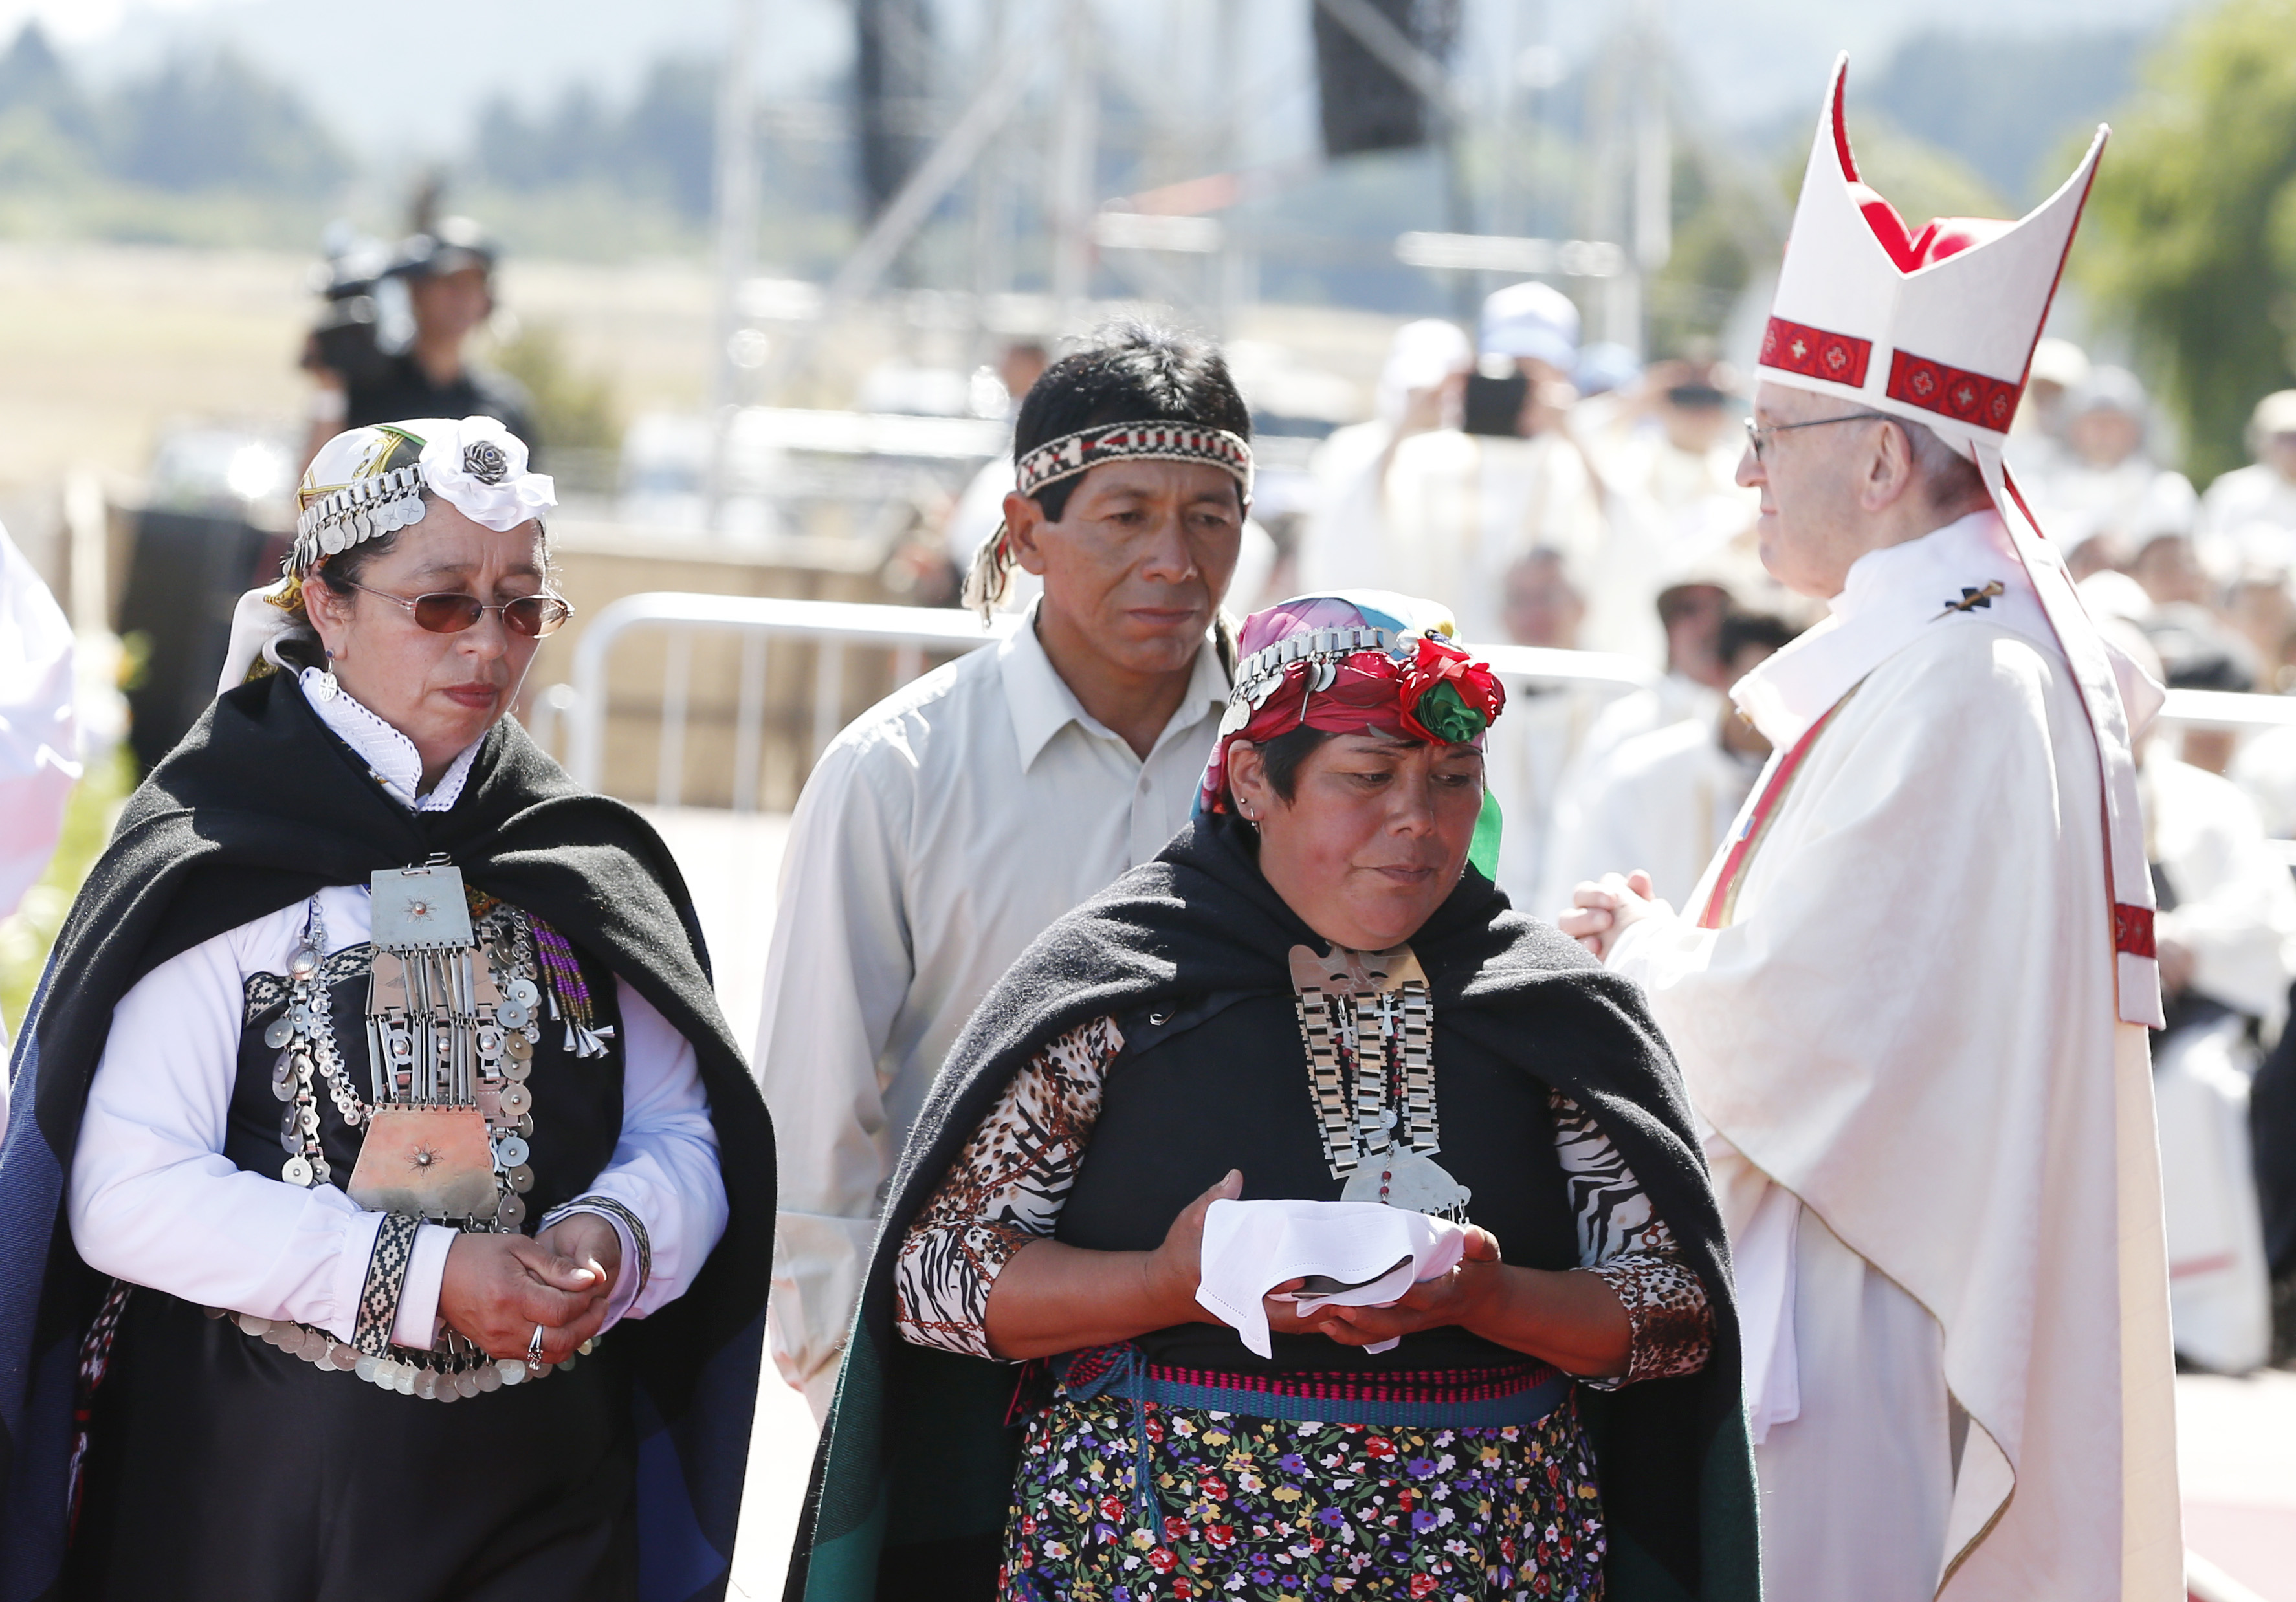 Indigenous people walk past Pope Francis after presenting offertory gifts during the pope's celebration of Mass at the Maquehue Airport near Temuco, Chile, Jan. 17. (CNS photo/Paul Haring) See POPE-TEMUCO-MASS Jan. 17, 2018.